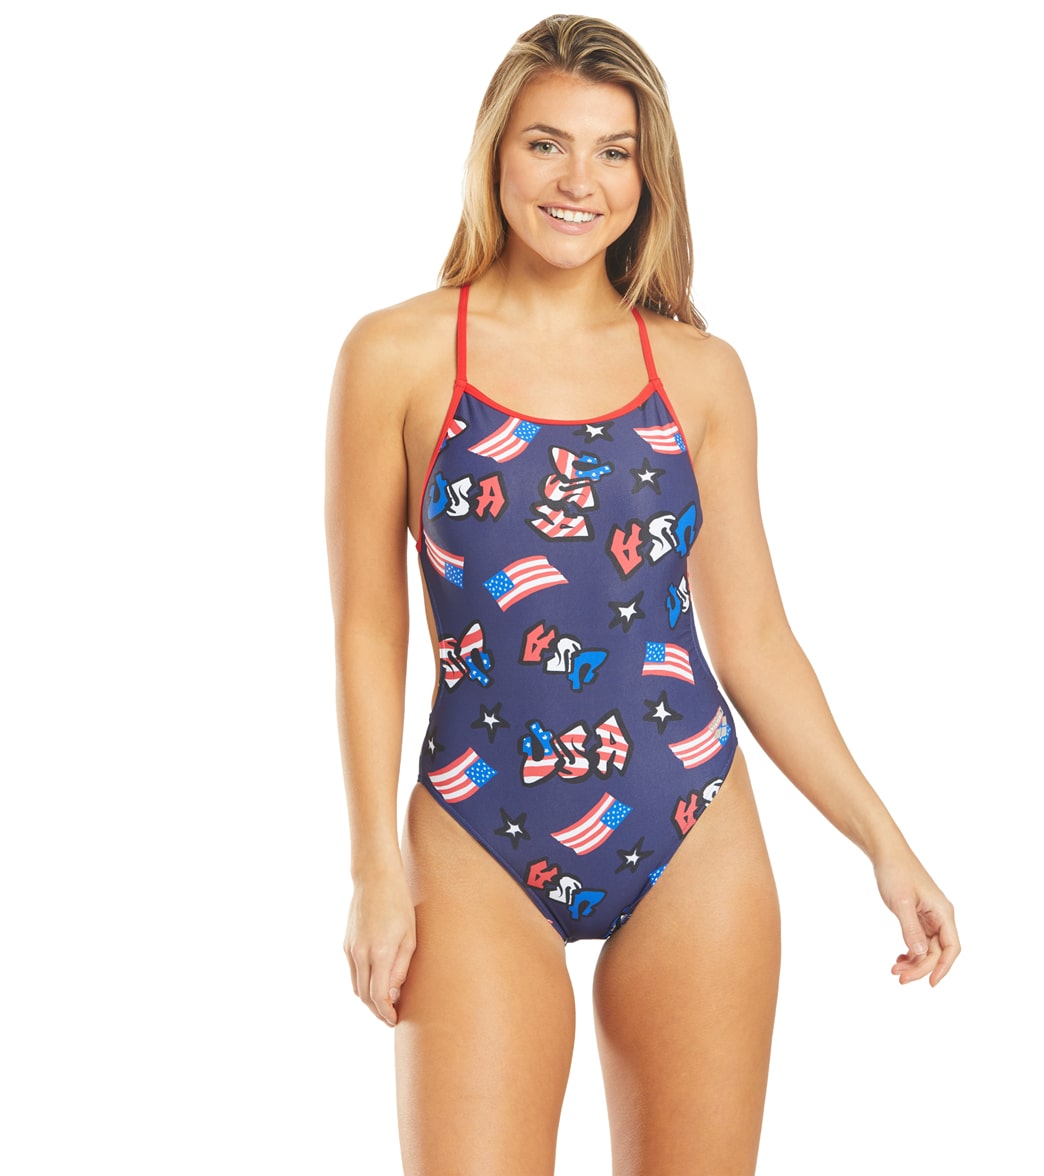 Arena Womens Graffiti USA Booster Back One Piece Swimsuit at SwimOutlet